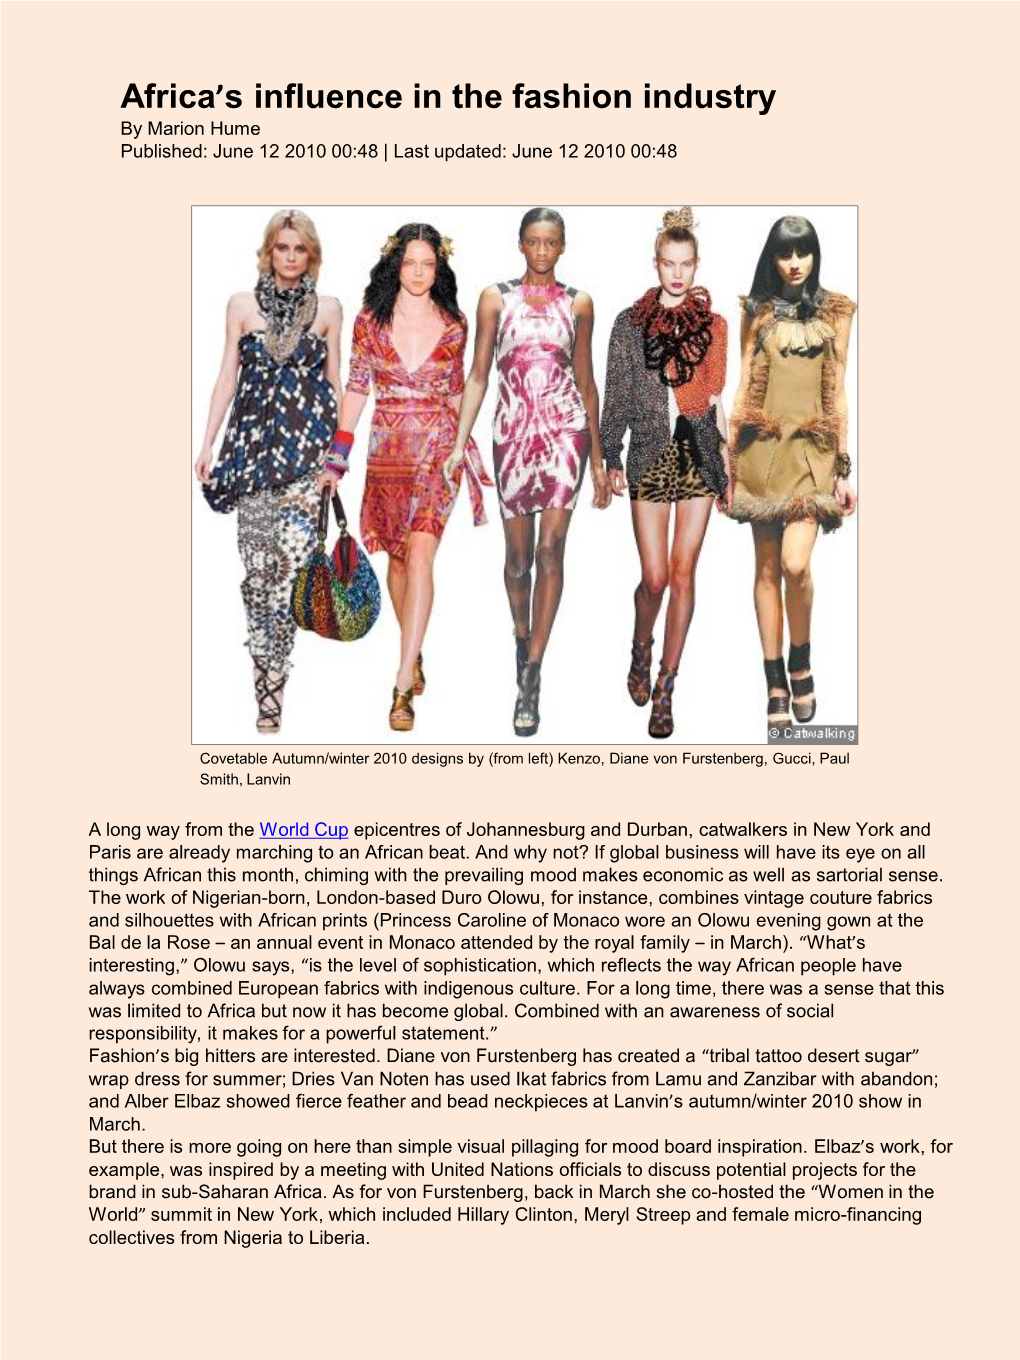 Africa's Influence in the Fashion Industry